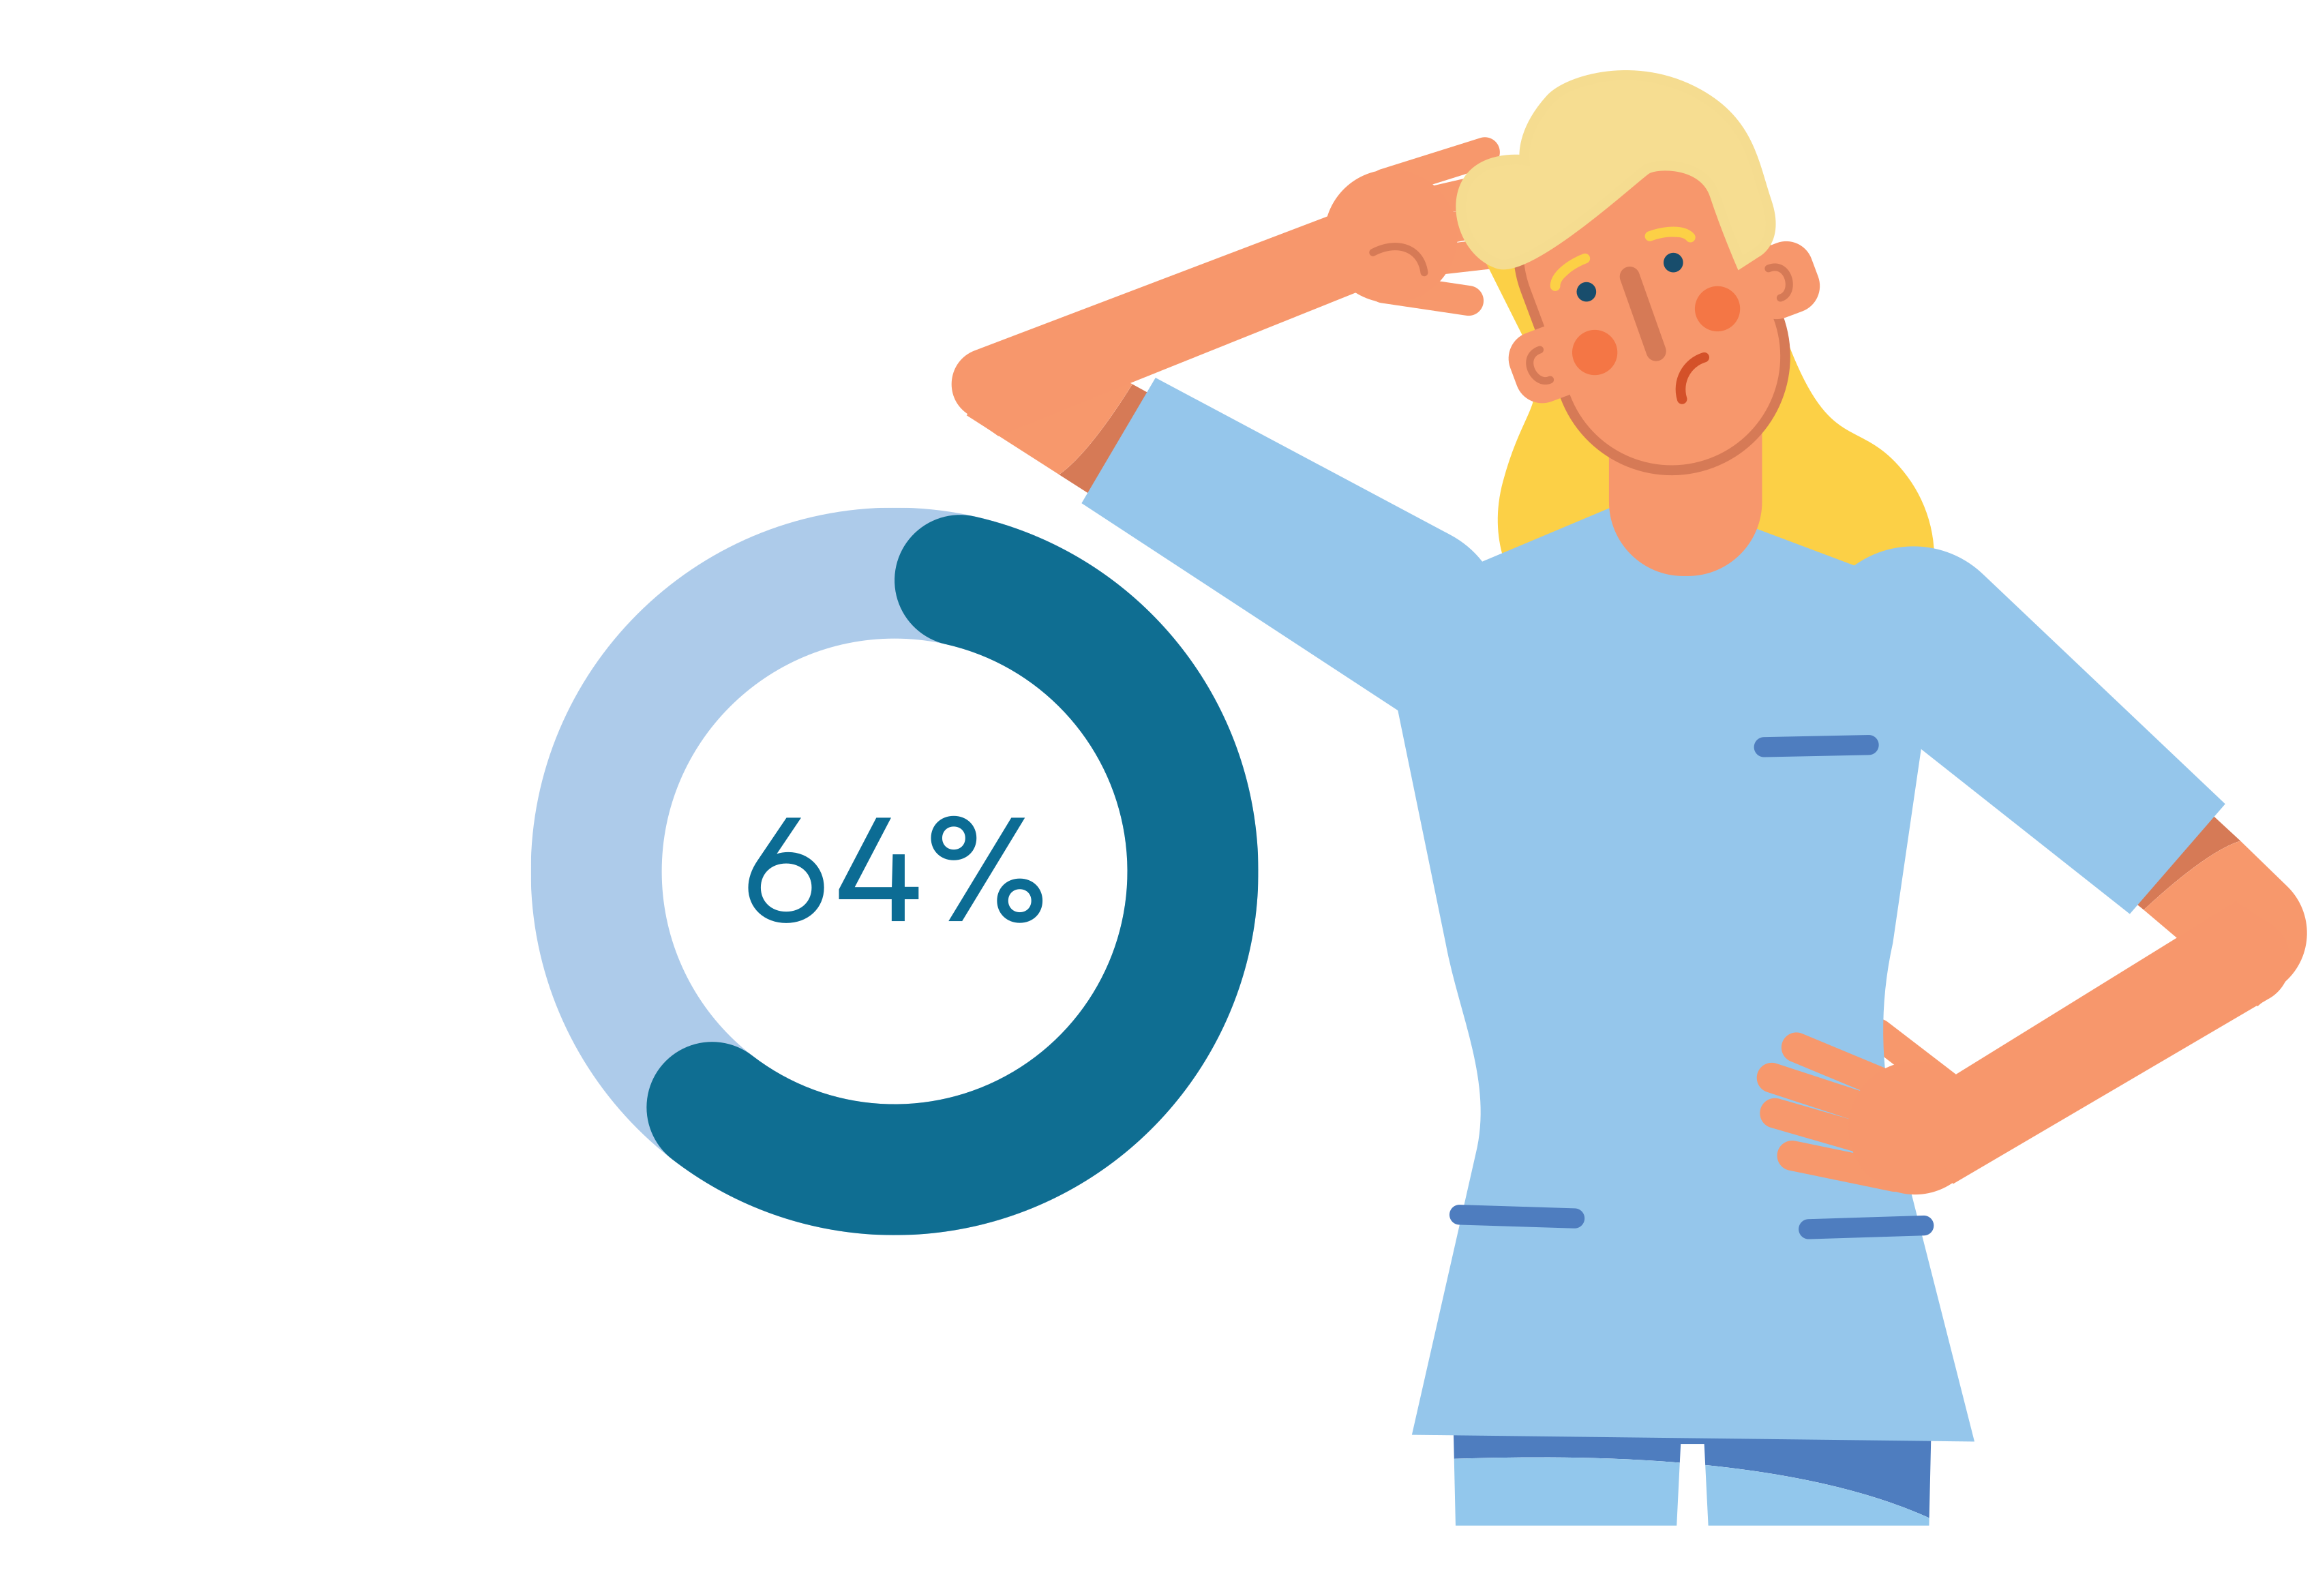 6 out of 10 nurses are looking to leave their profession